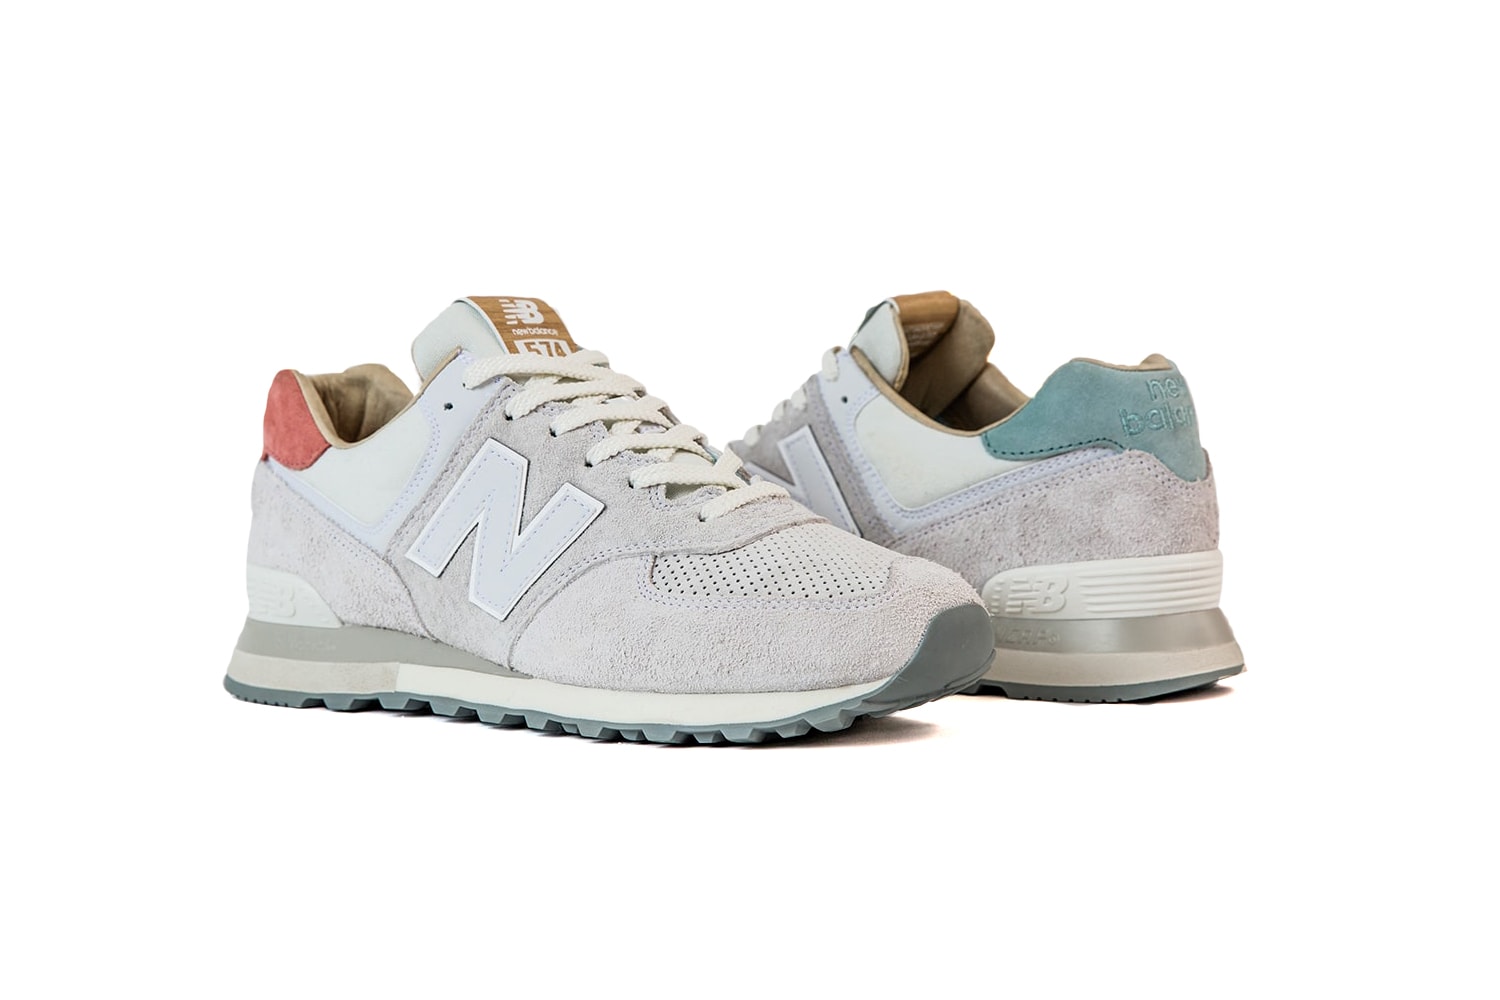 New Balance 574 TO THE STREETS Info | Hypebeast